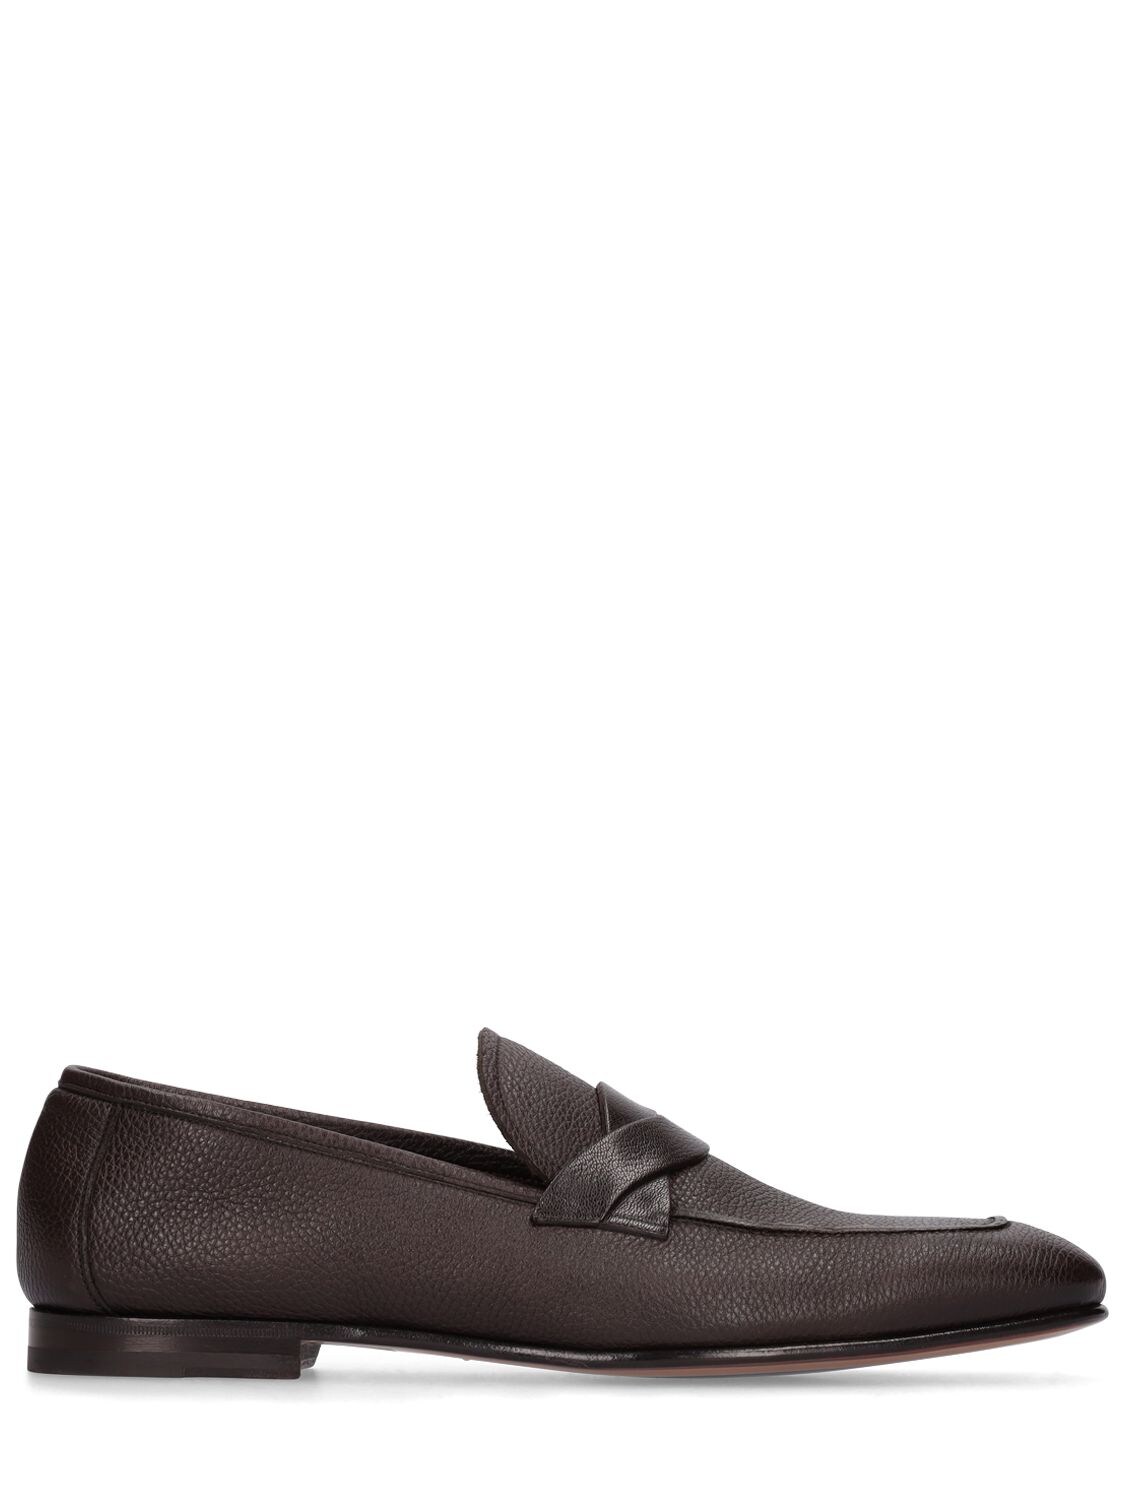 TOM FORD GRAINED LEATHER LOAFERS